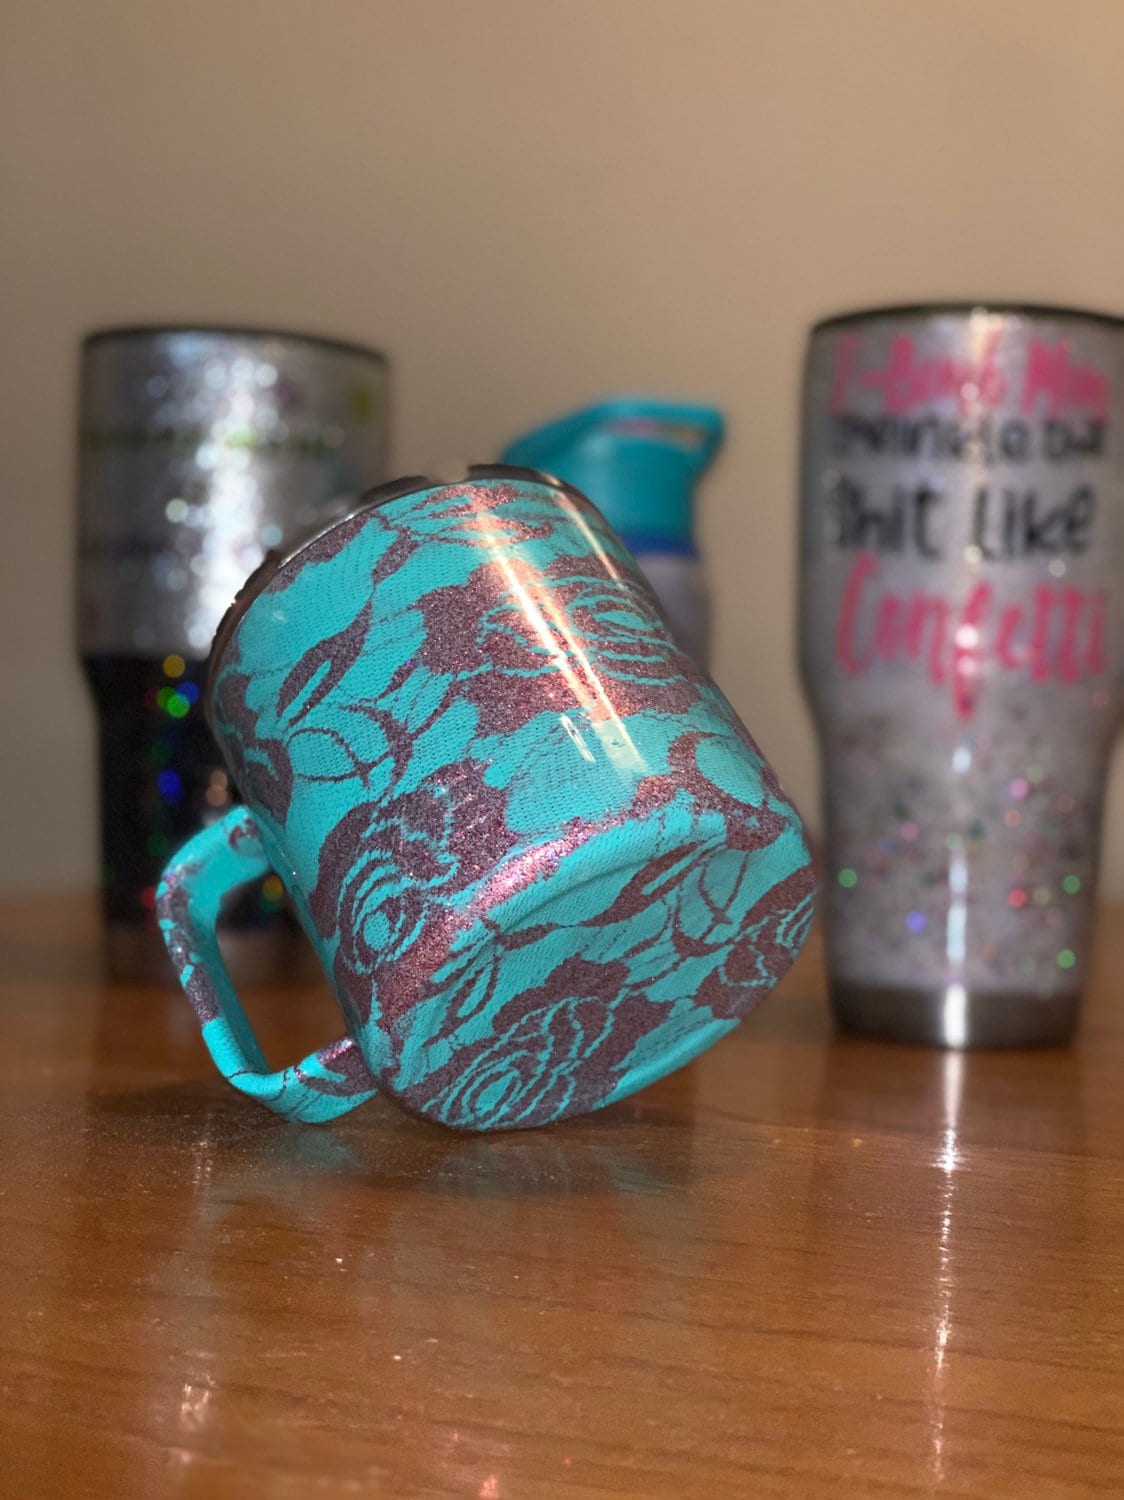 Custom Engraved YETI Rambler 14oz Stackable Mug with Magslider Lid –  Curated by Kayla